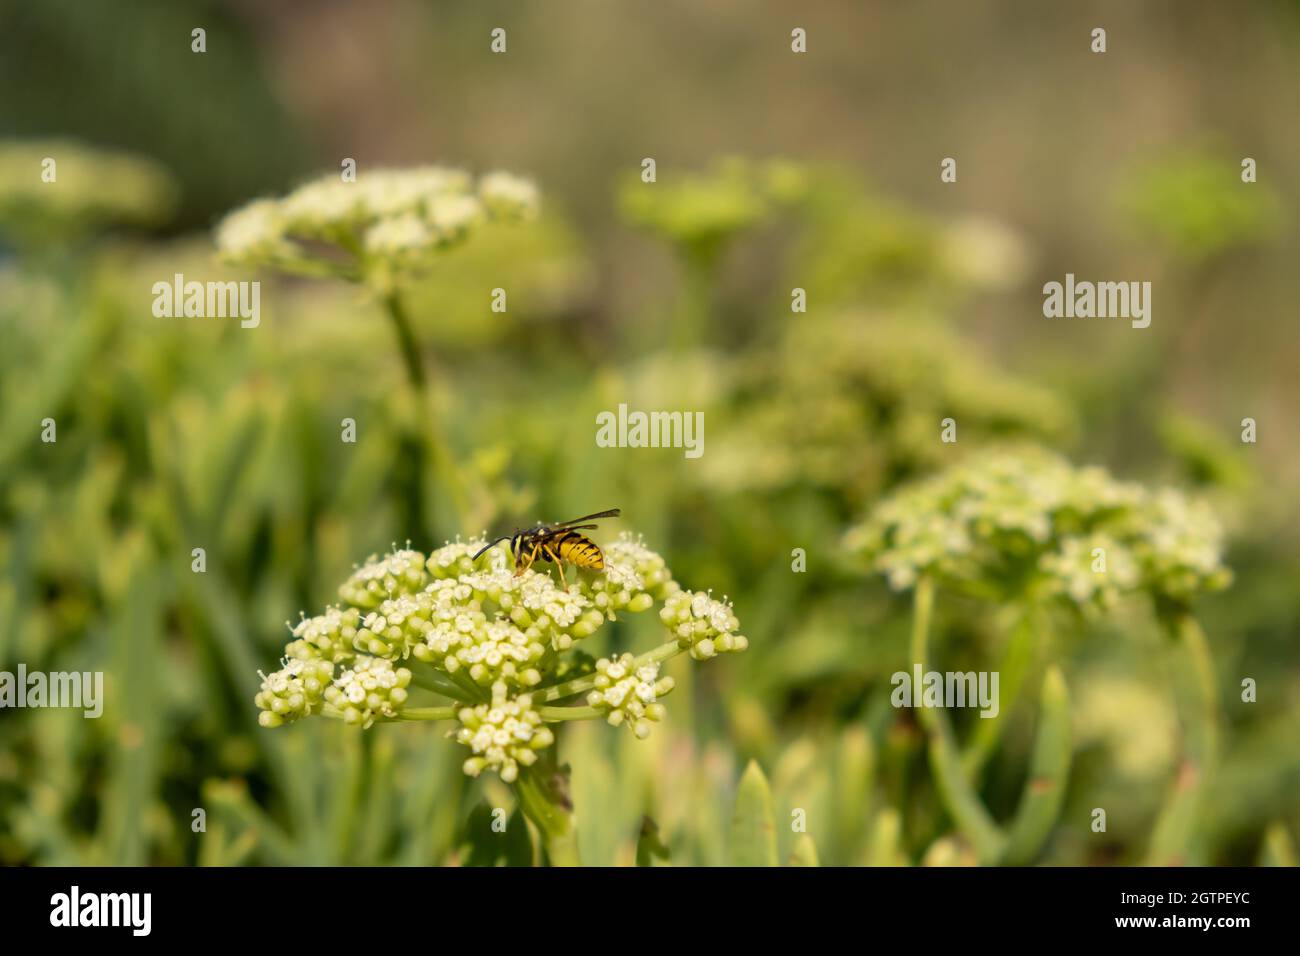 Wild honeybee on blooming sea fennel or crithmum or rock samphire plant, closeup view.  Bee collecting pollen from flower. Pollination, nectar collect Stock Photo